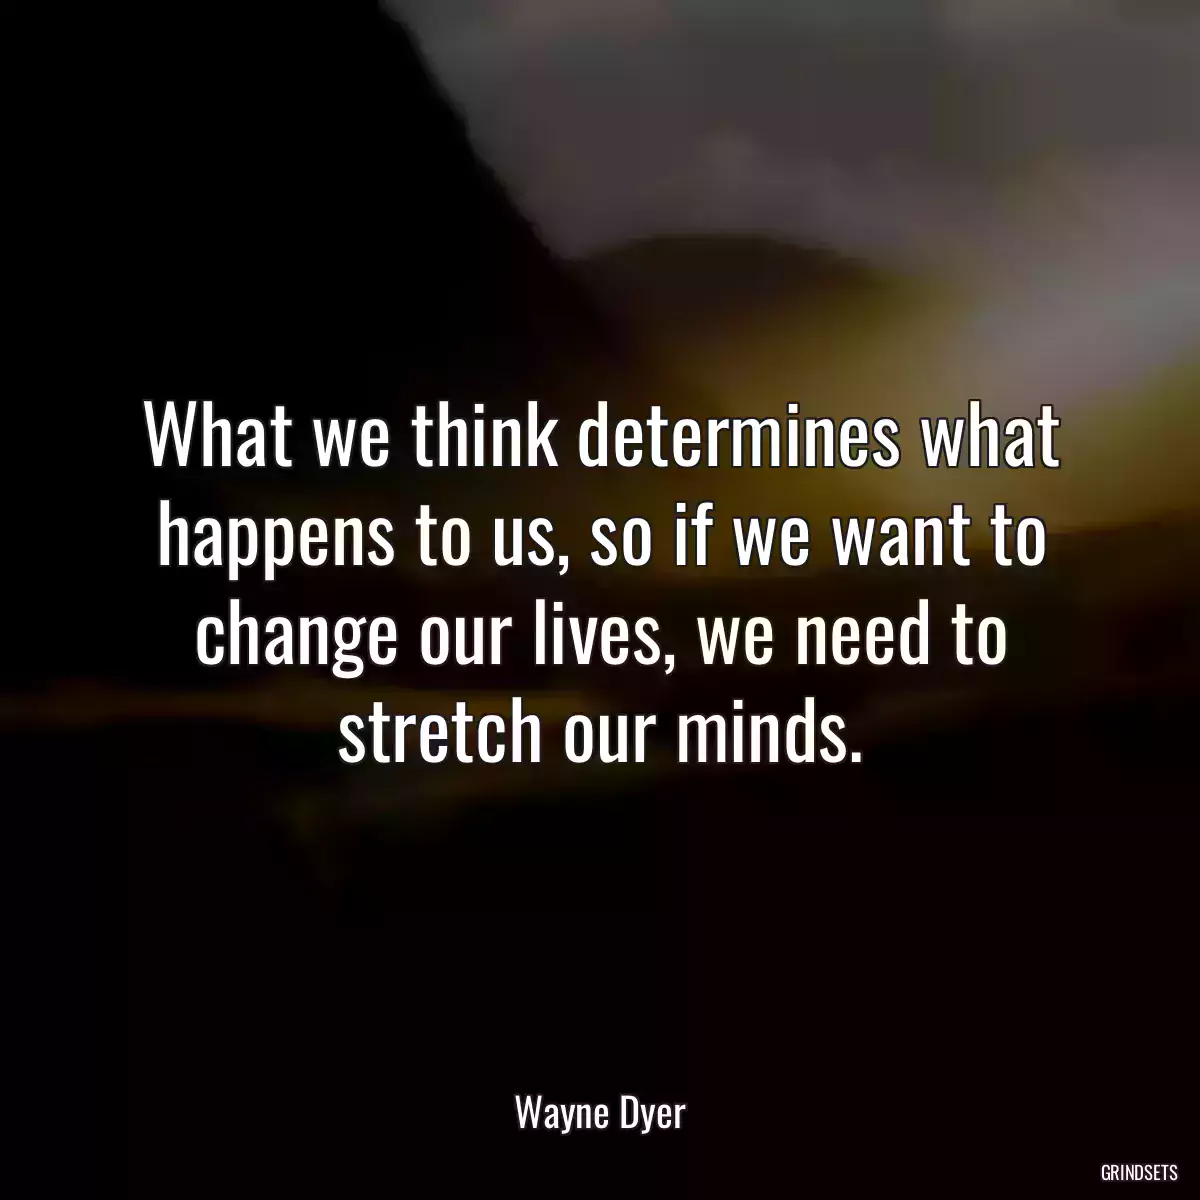 What we think determines what happens to us, so if we want to change our lives, we need to stretch our minds.